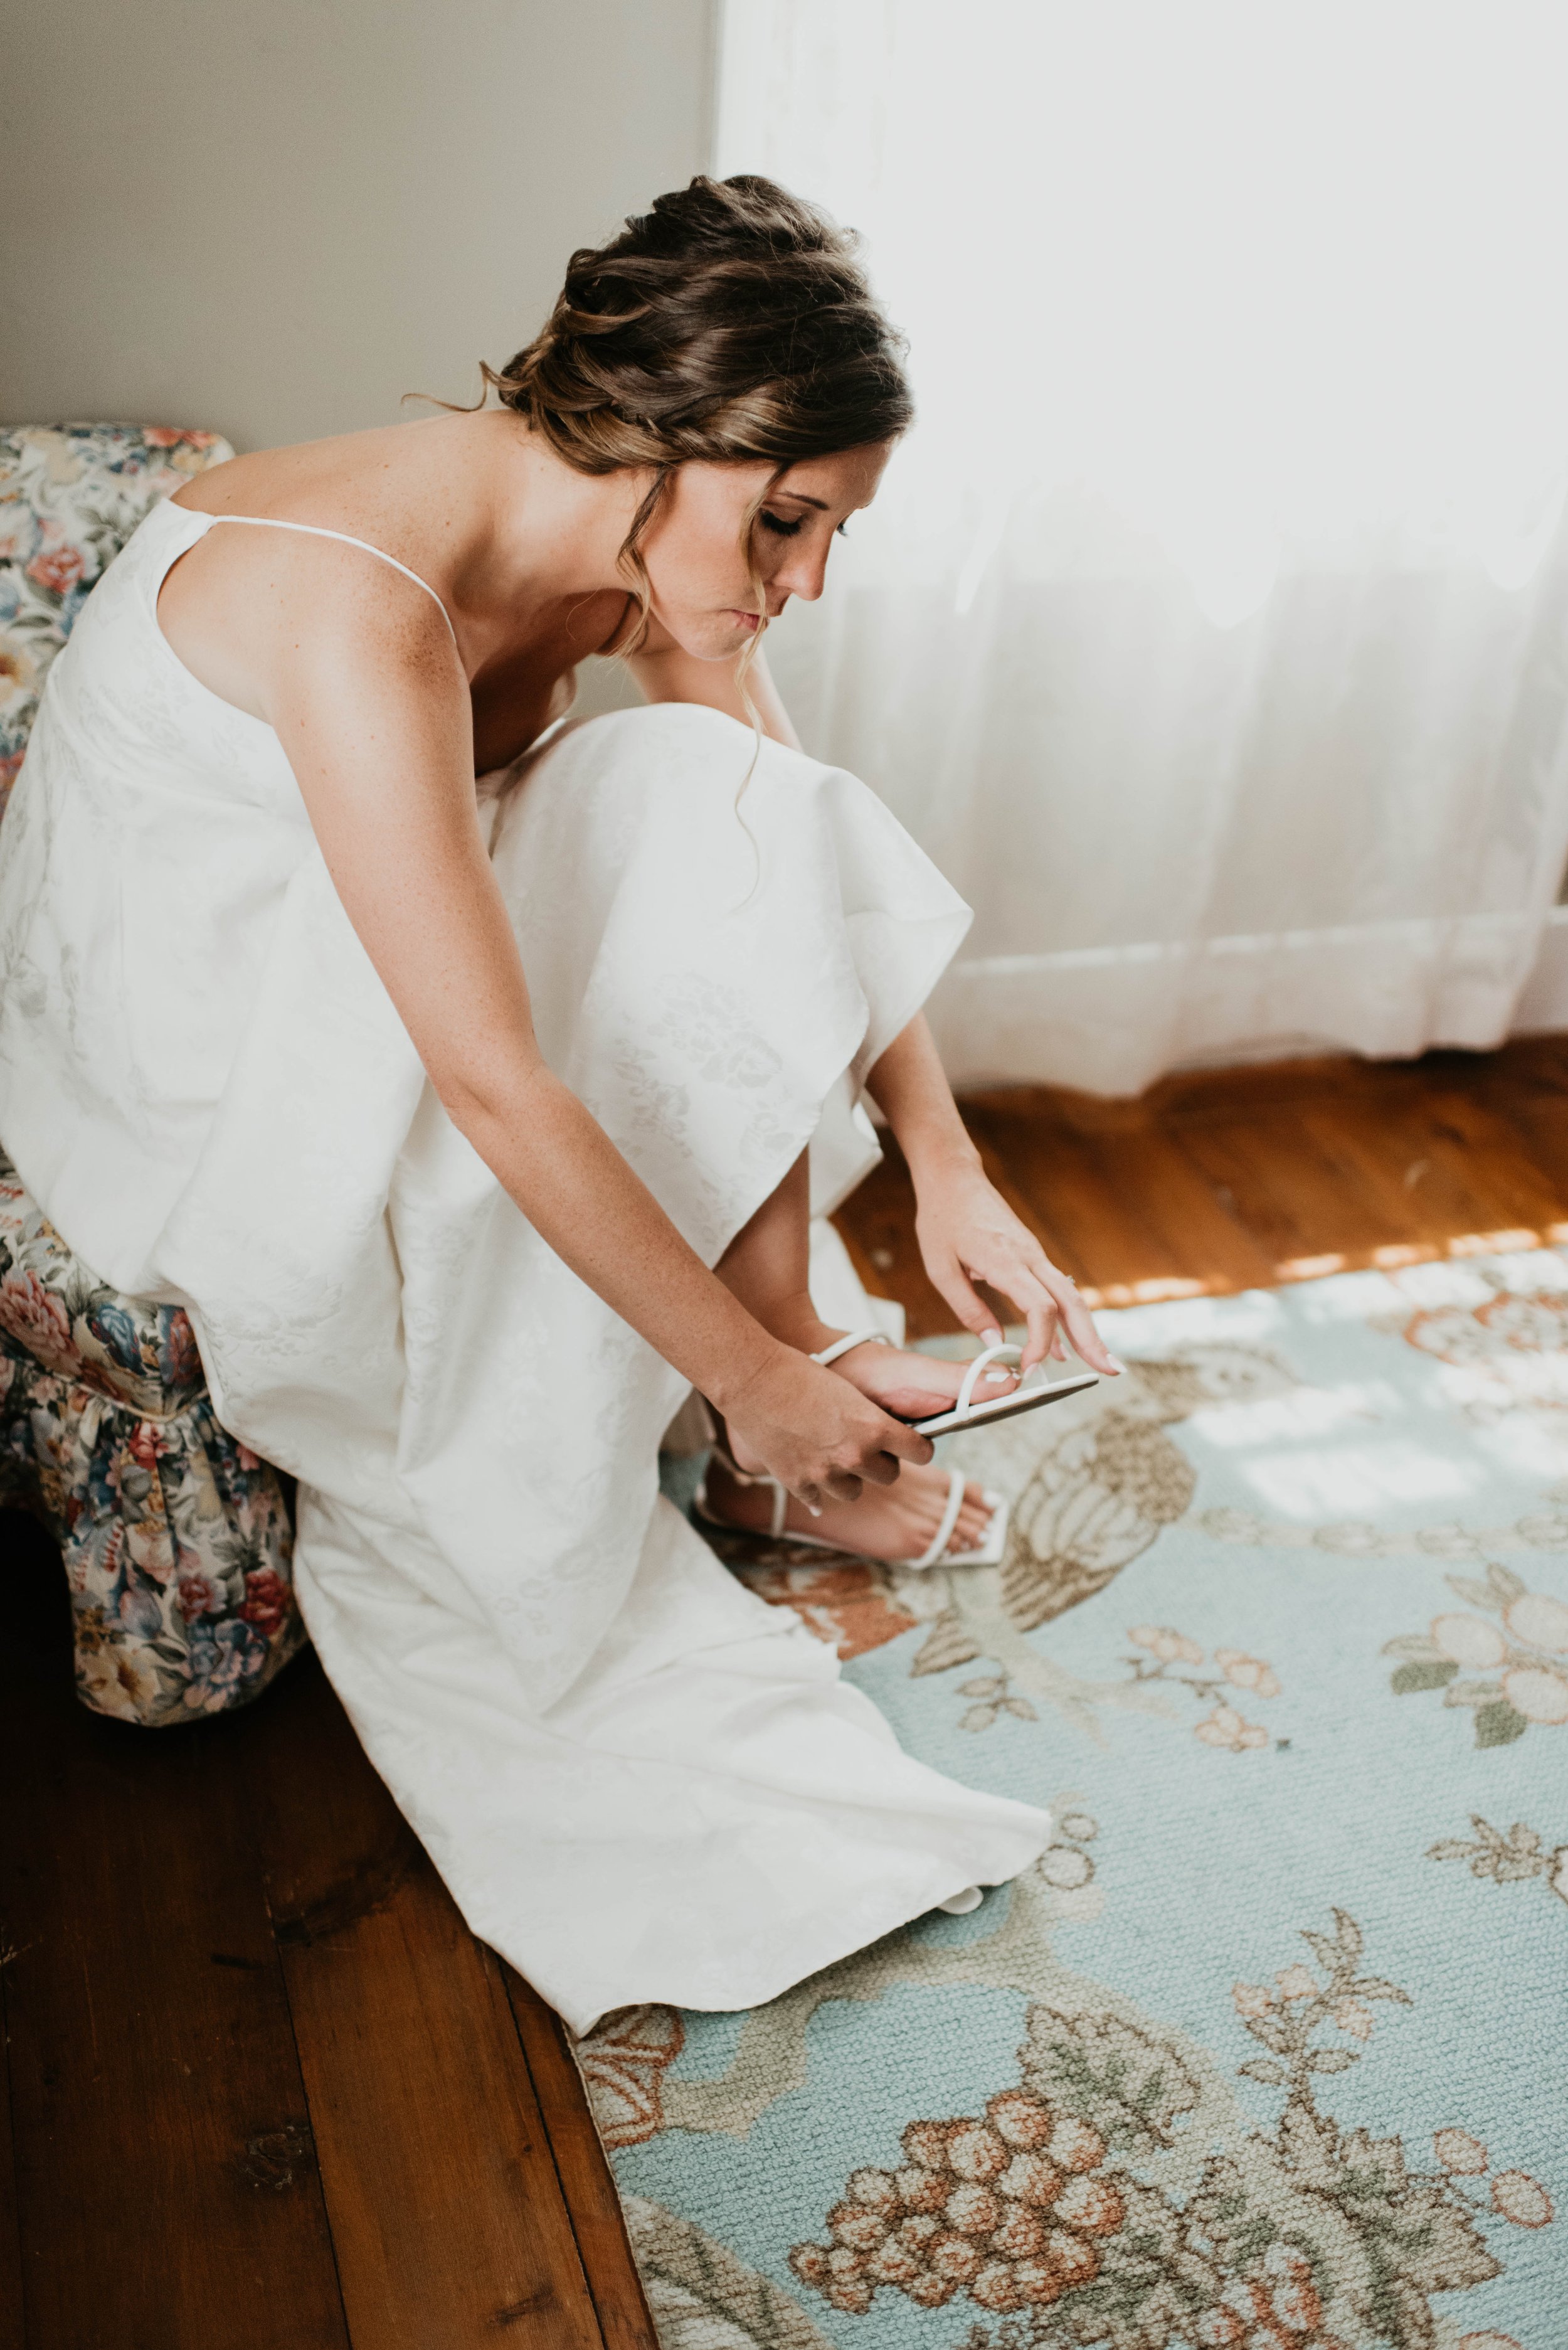 Bride putting on shoes | Bridal hair | Bridal photography| Tales and Tree Photography.jpg